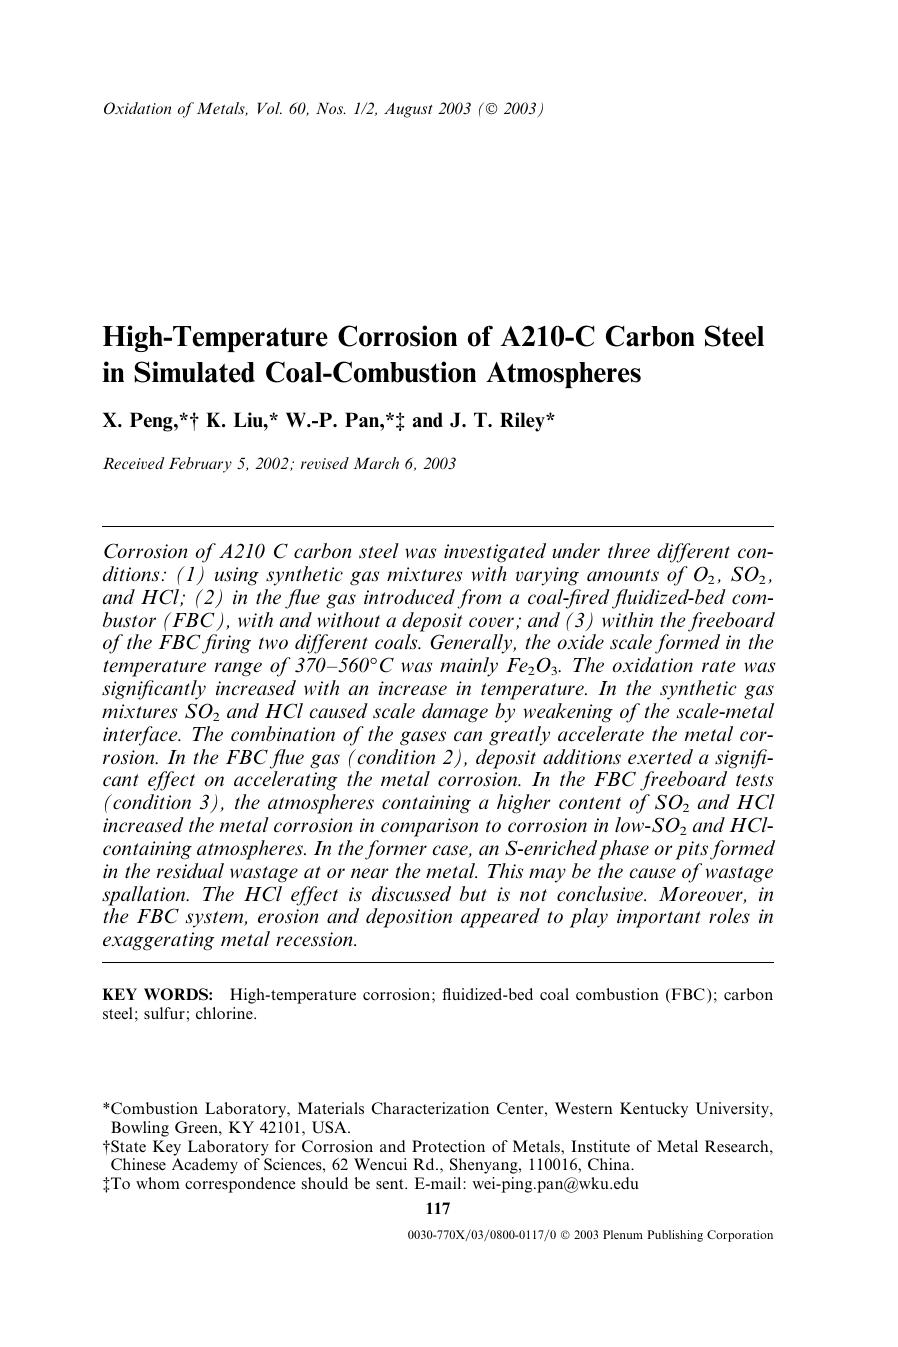 High-Temperature Corrosion of A210-C Carbon Steel in Simulated Coal-Combustion Atmospheres by Unknown